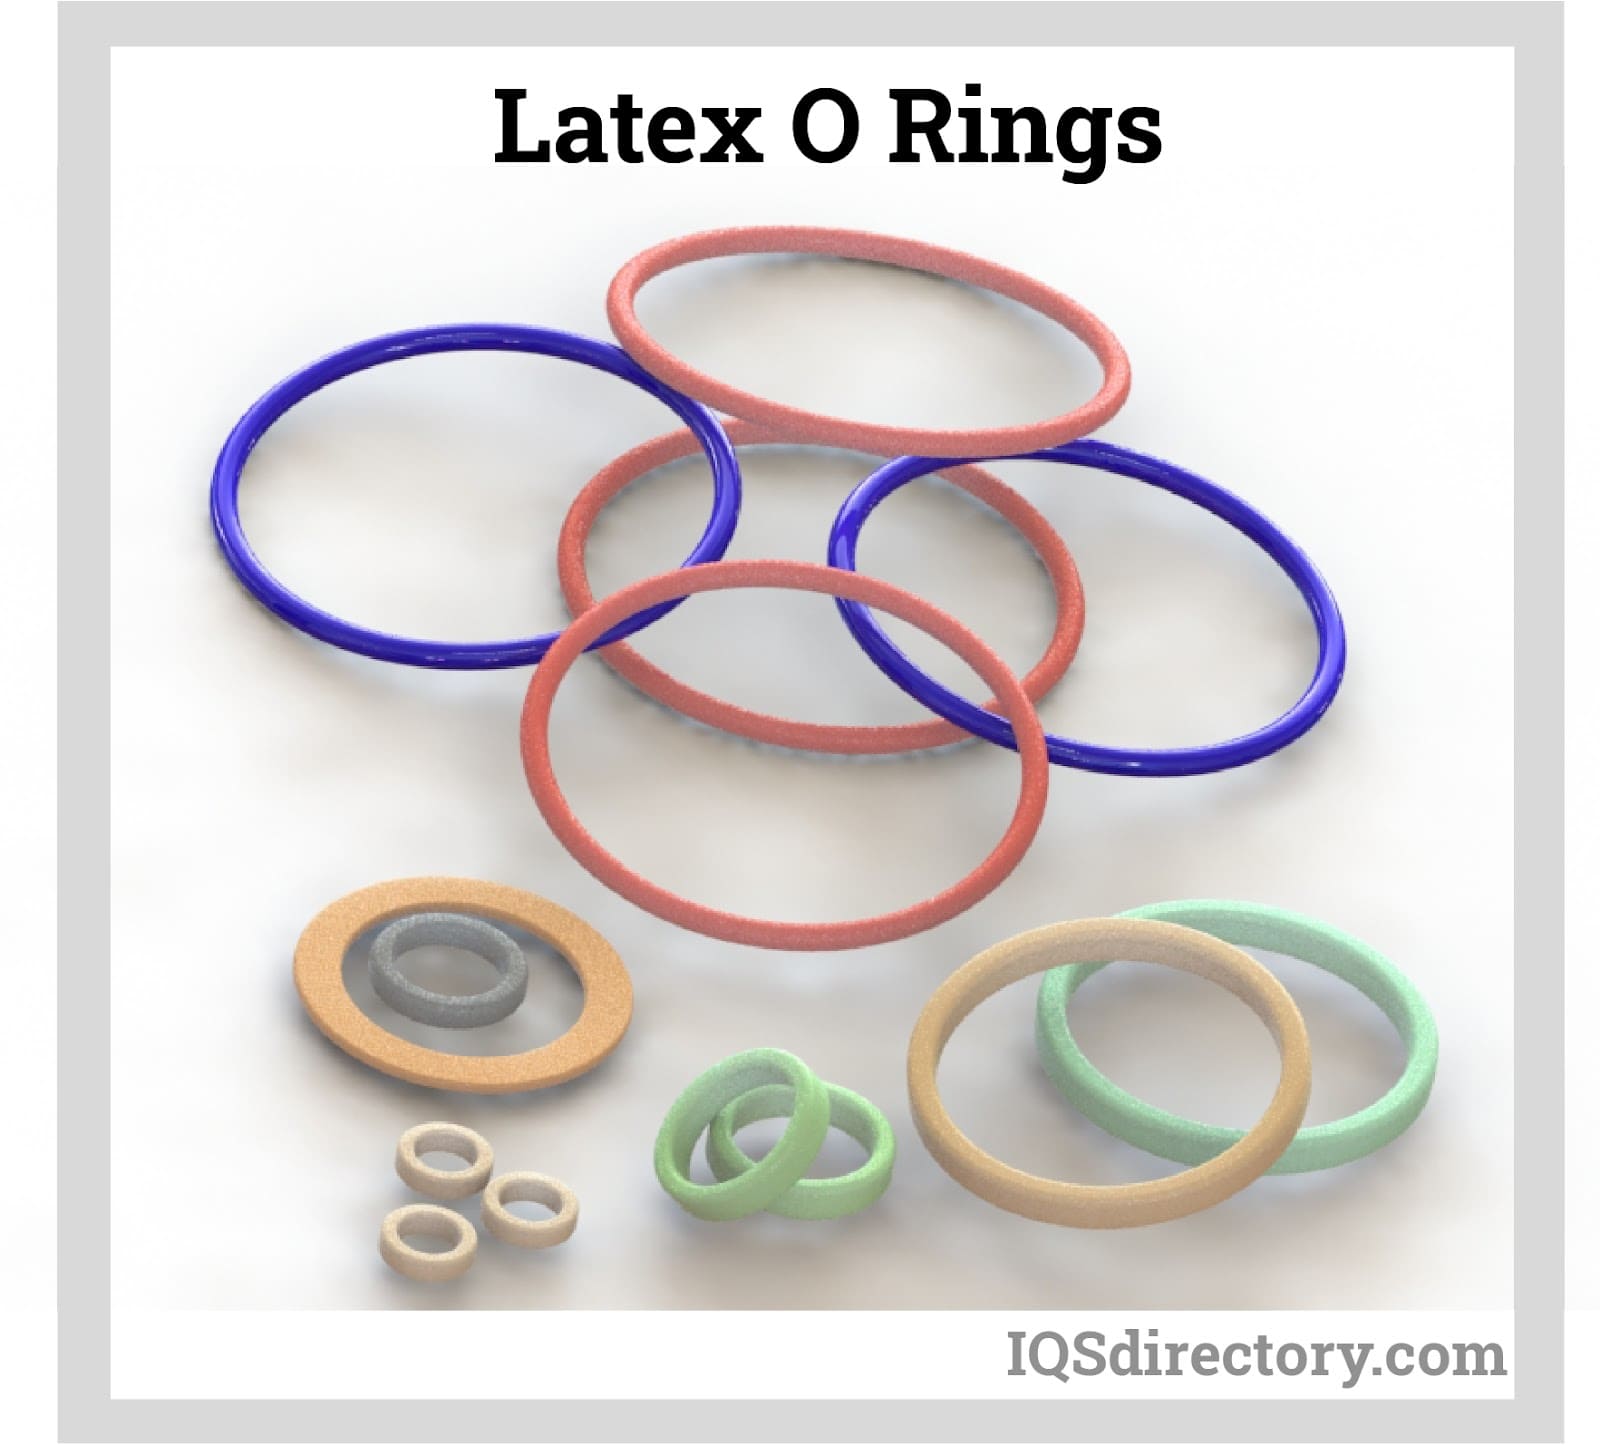 O-Rings - for Static Applications, G Series, MISUMI